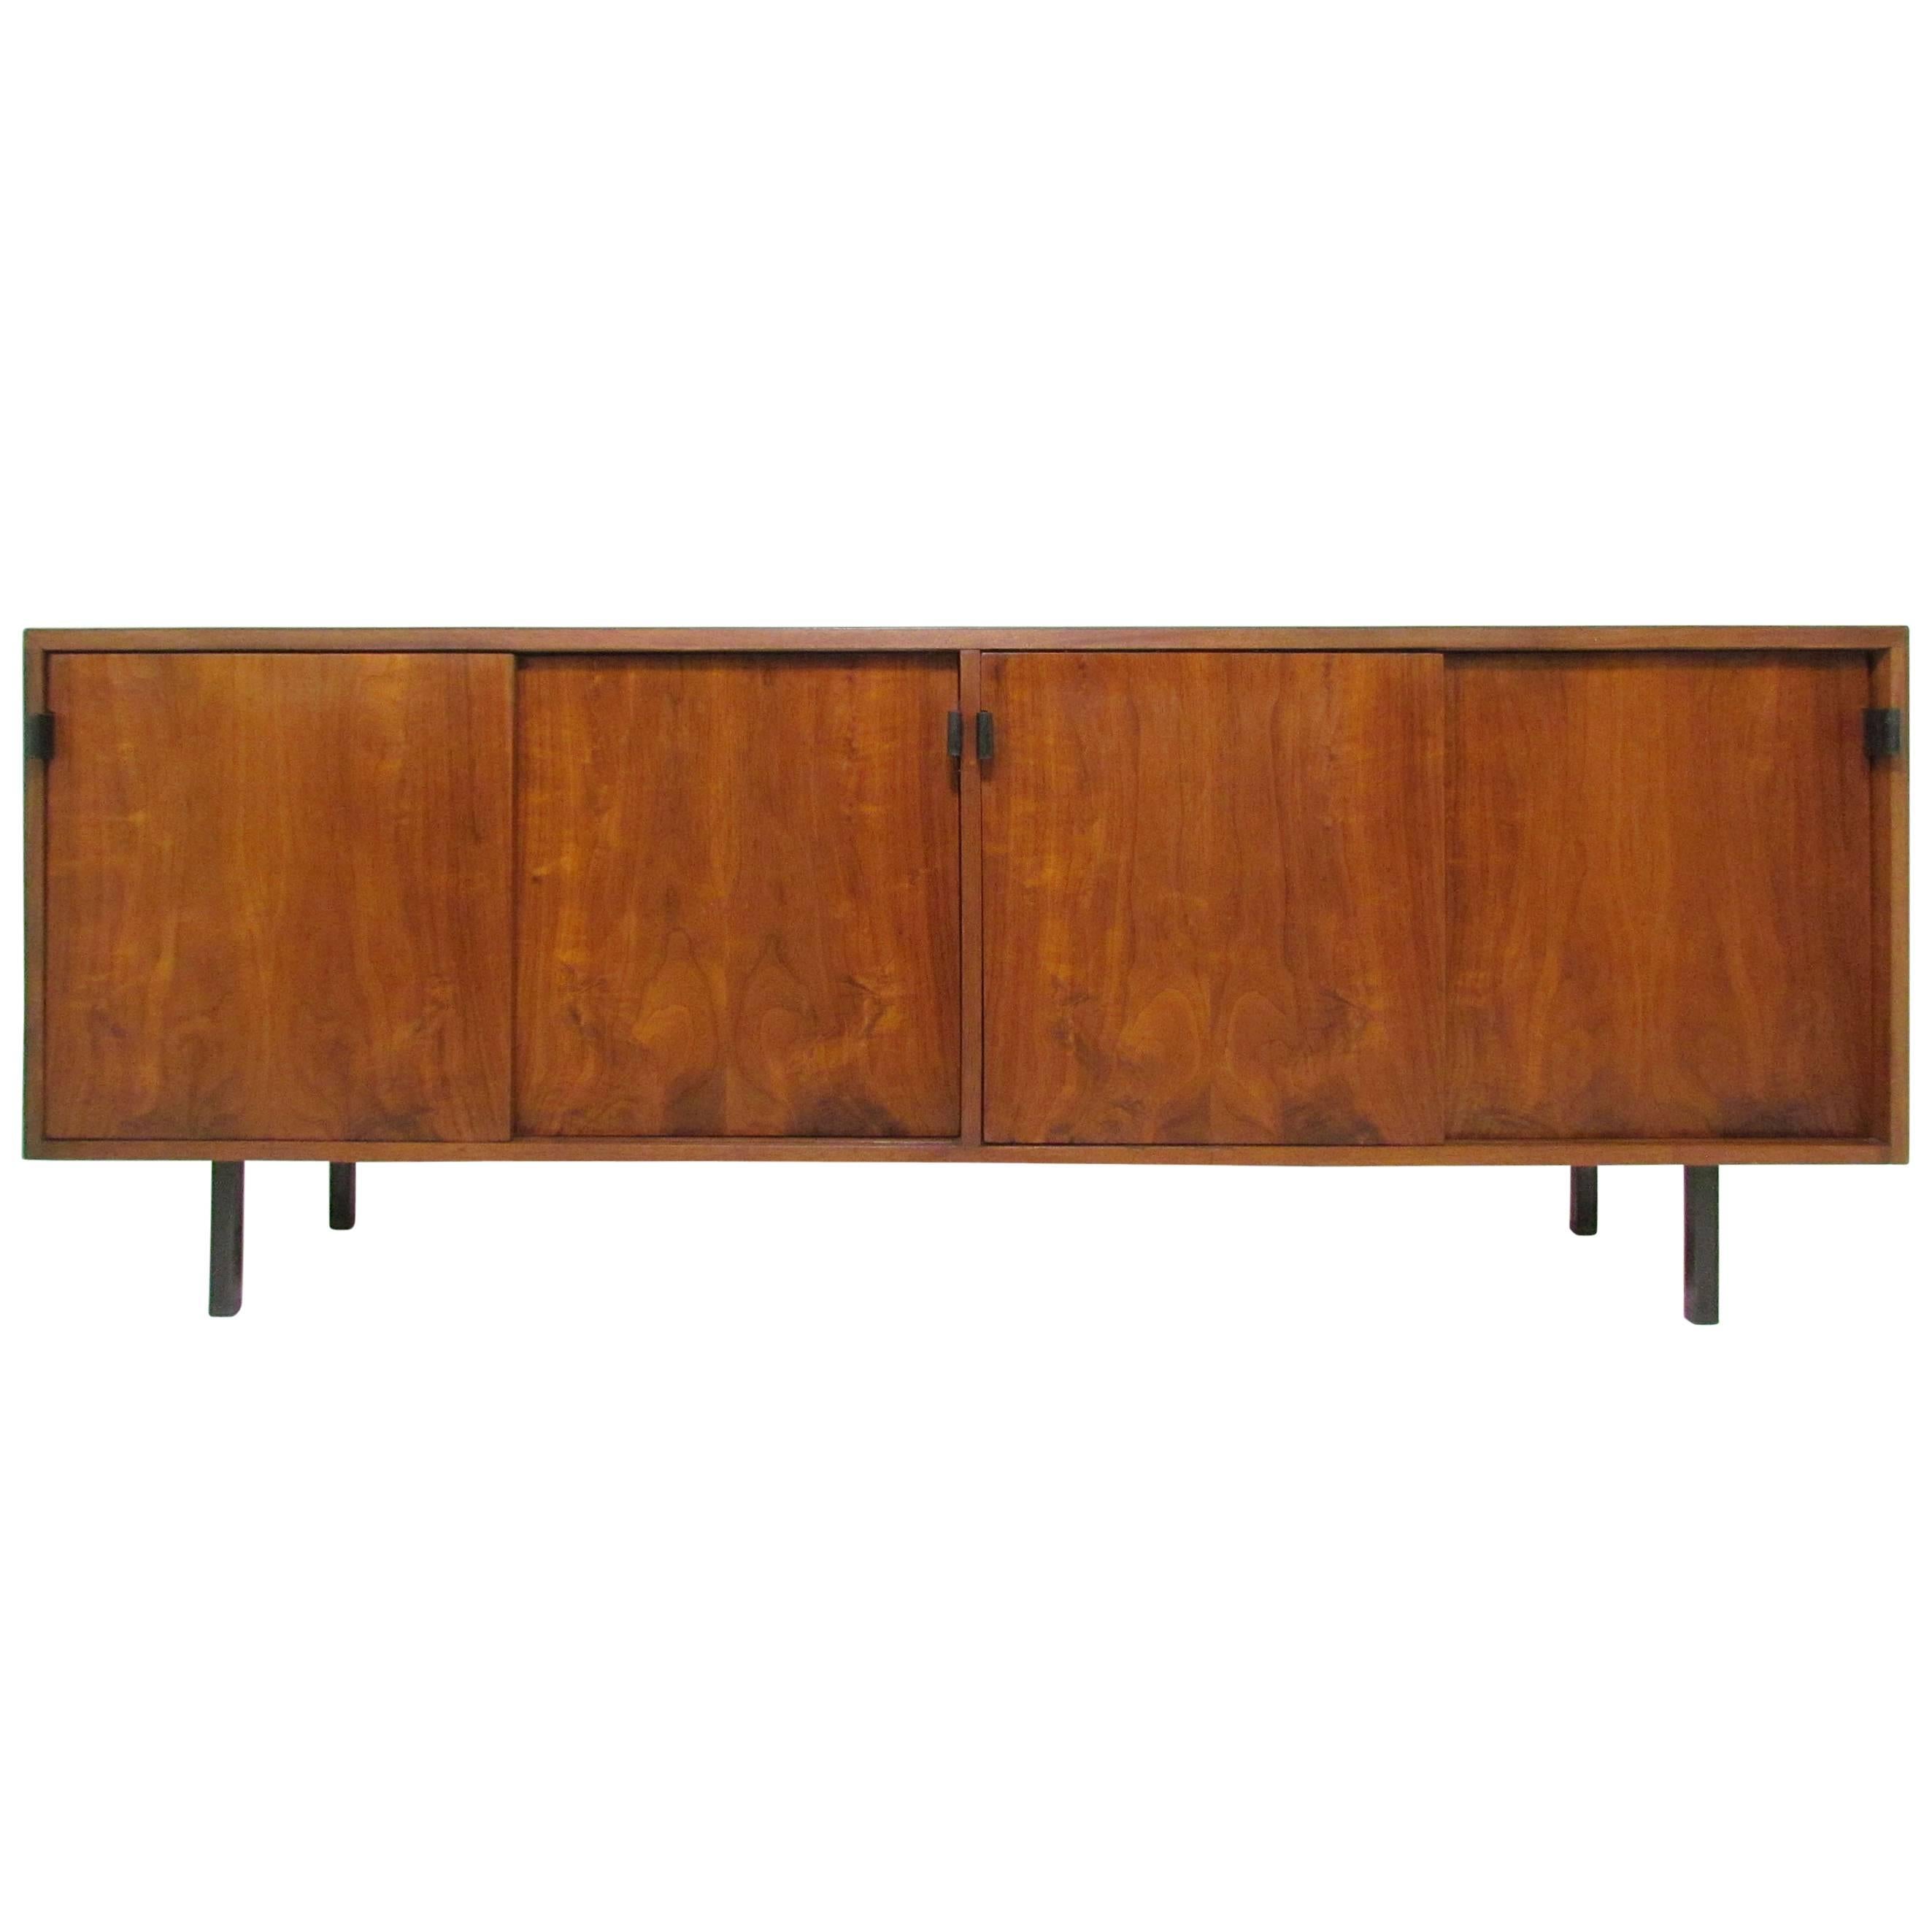 Florence Knoll Credenza with Leather Pulls, circa 1960s